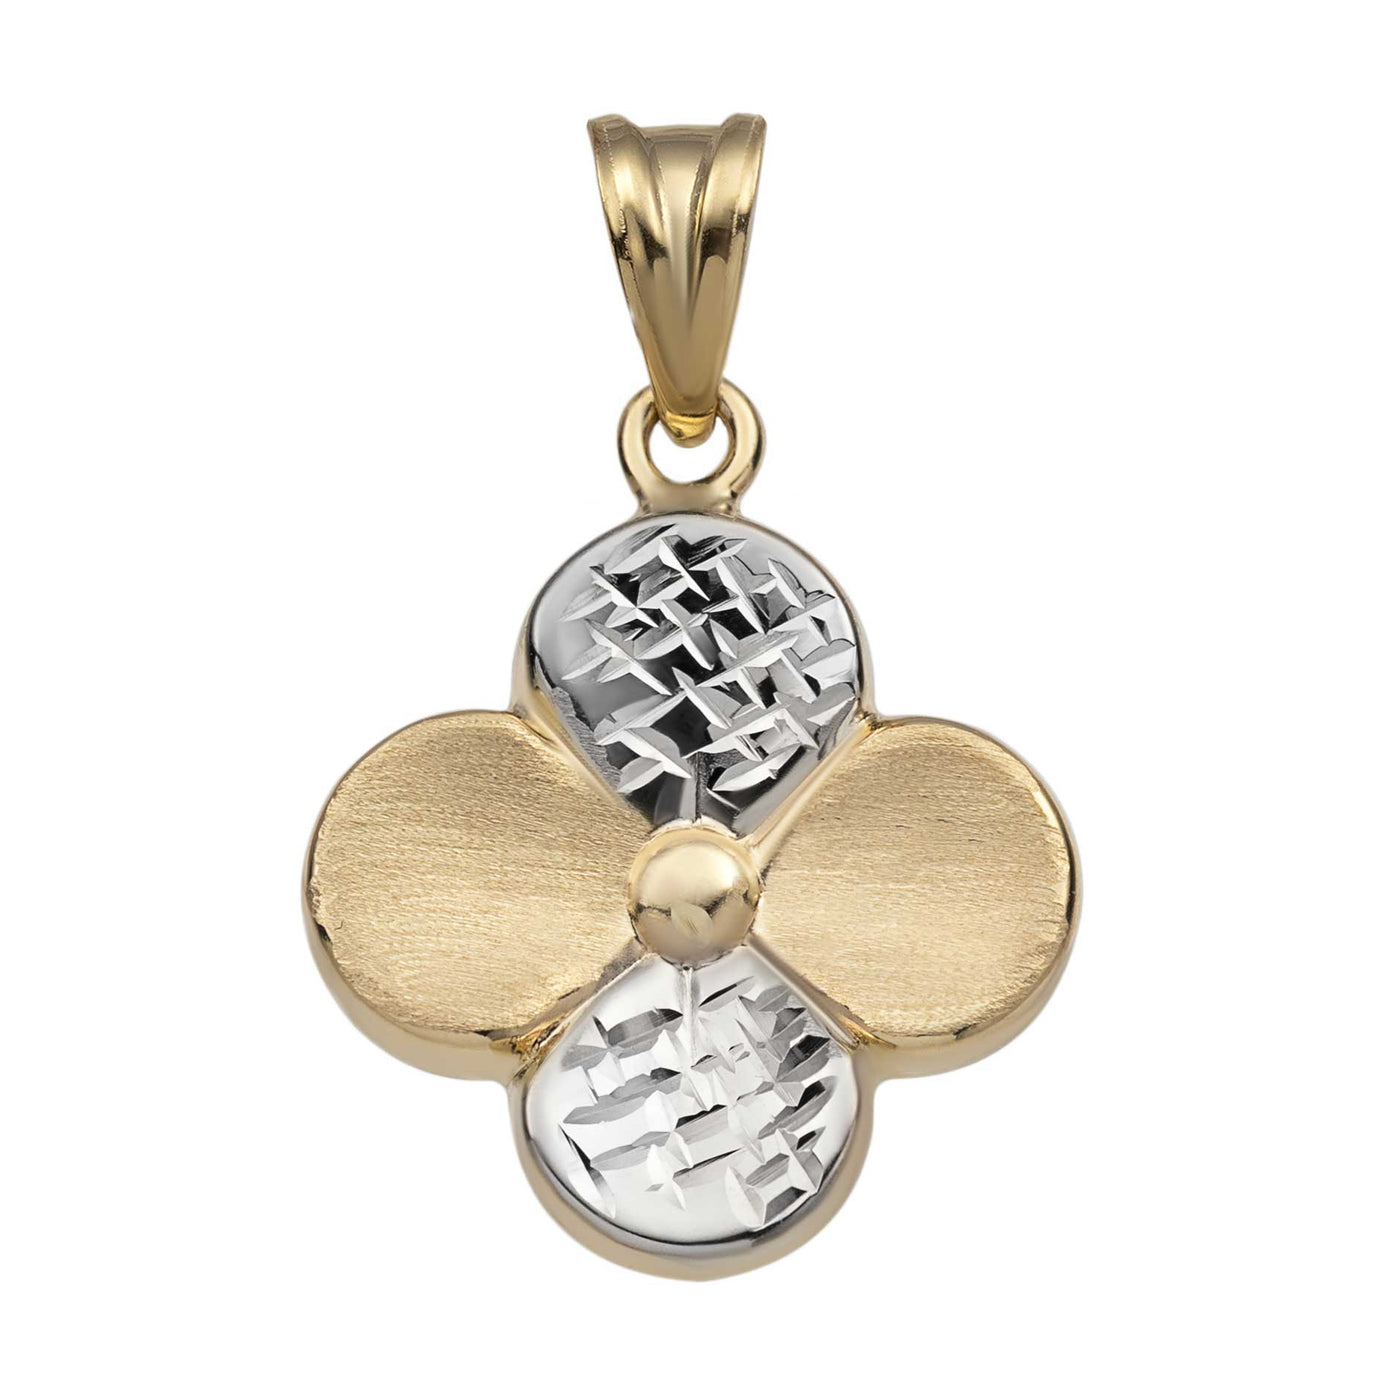 1 1/4" Four-Leaf Clover Pendant 10K Yellow Gold